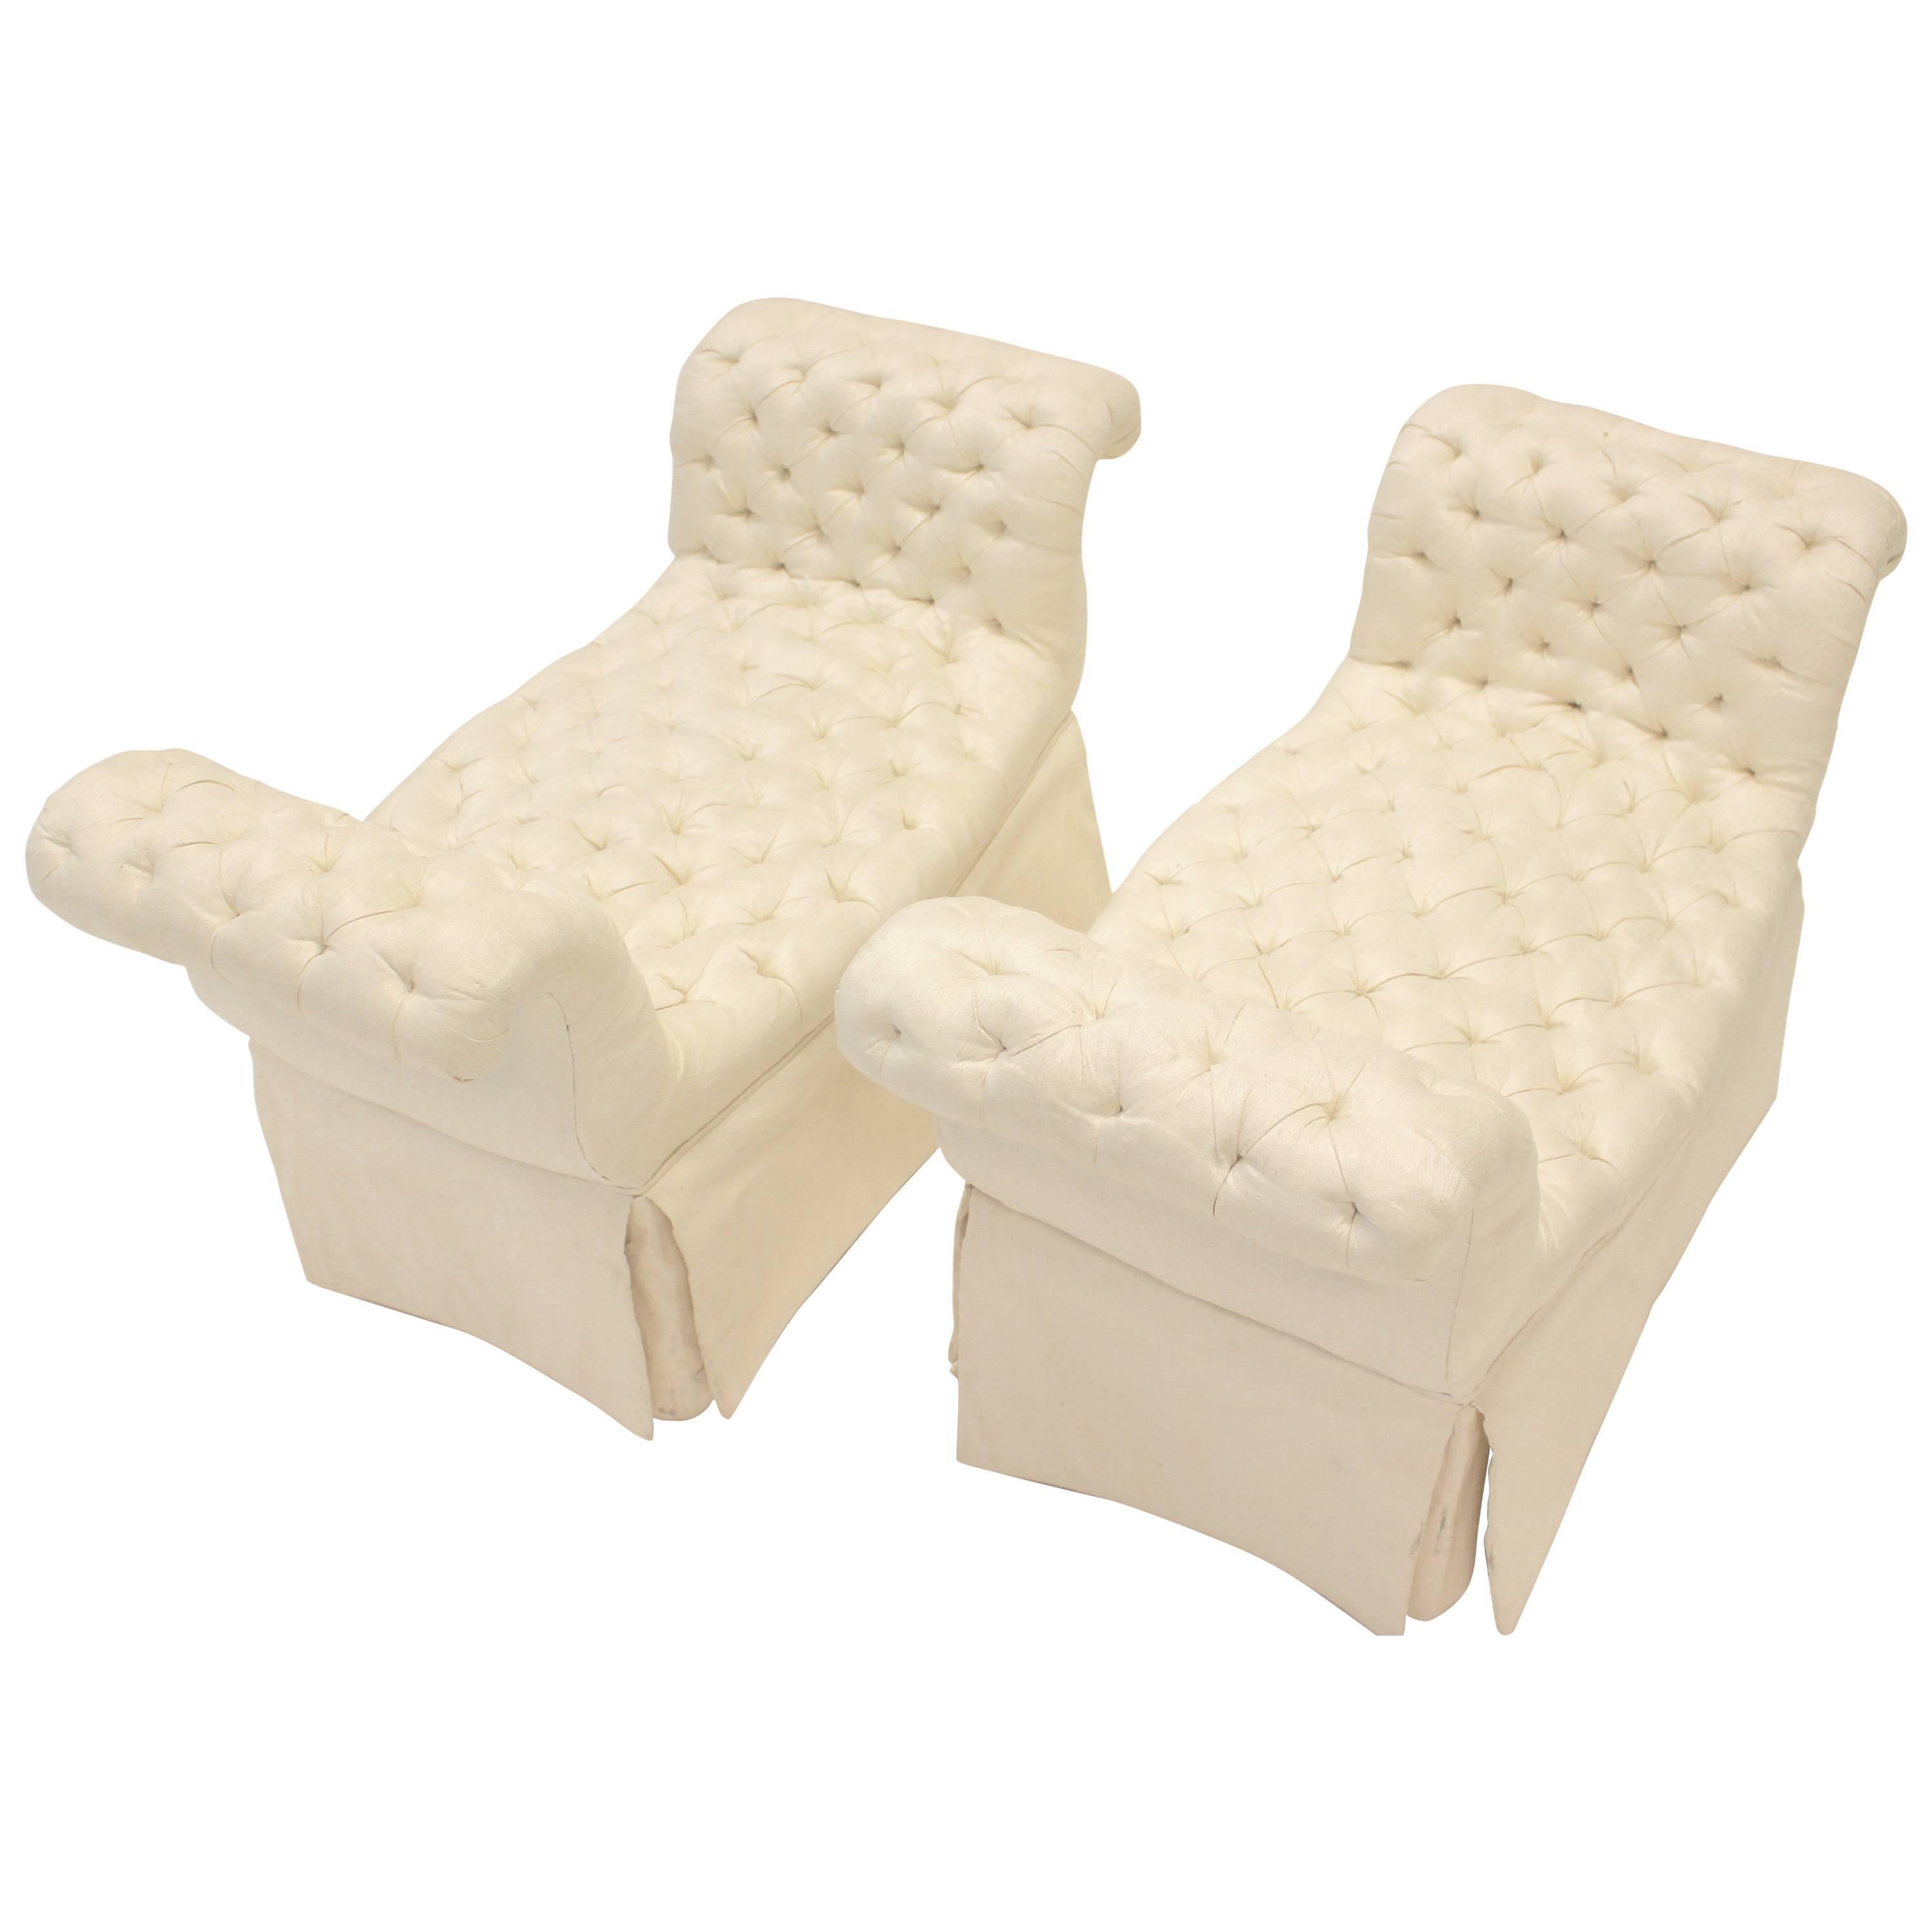 Pair of Cream-Colored Silk Button-Tufted Rolled Arm Benches with Ample Skirt For Sale